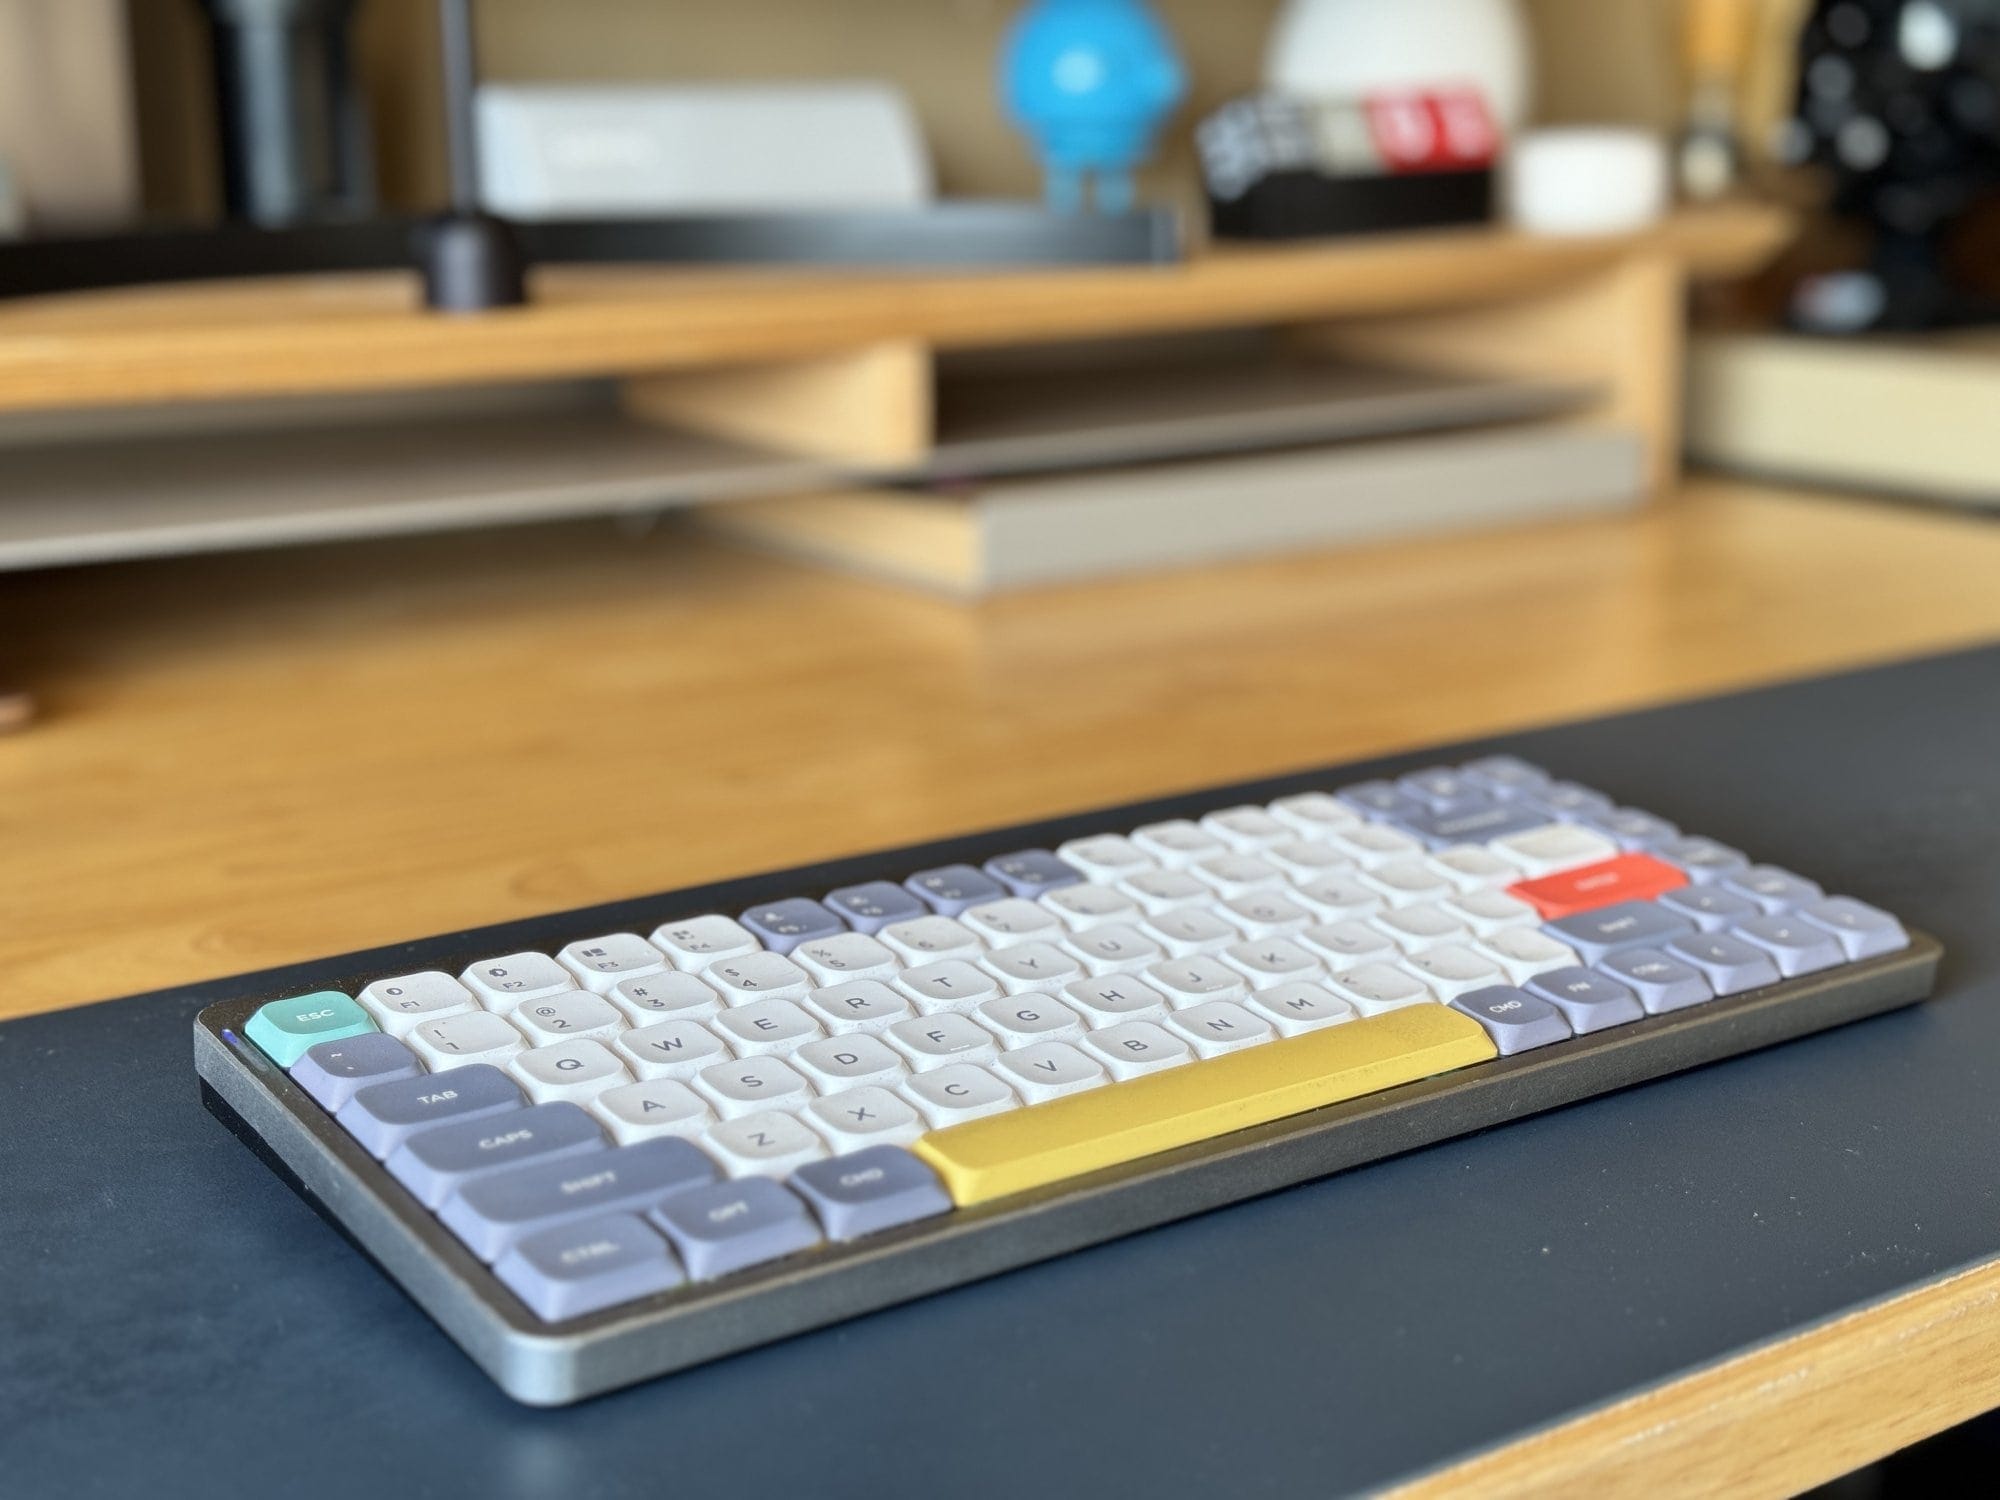 A NuPhy Air75 mechanical keyboard on the desk